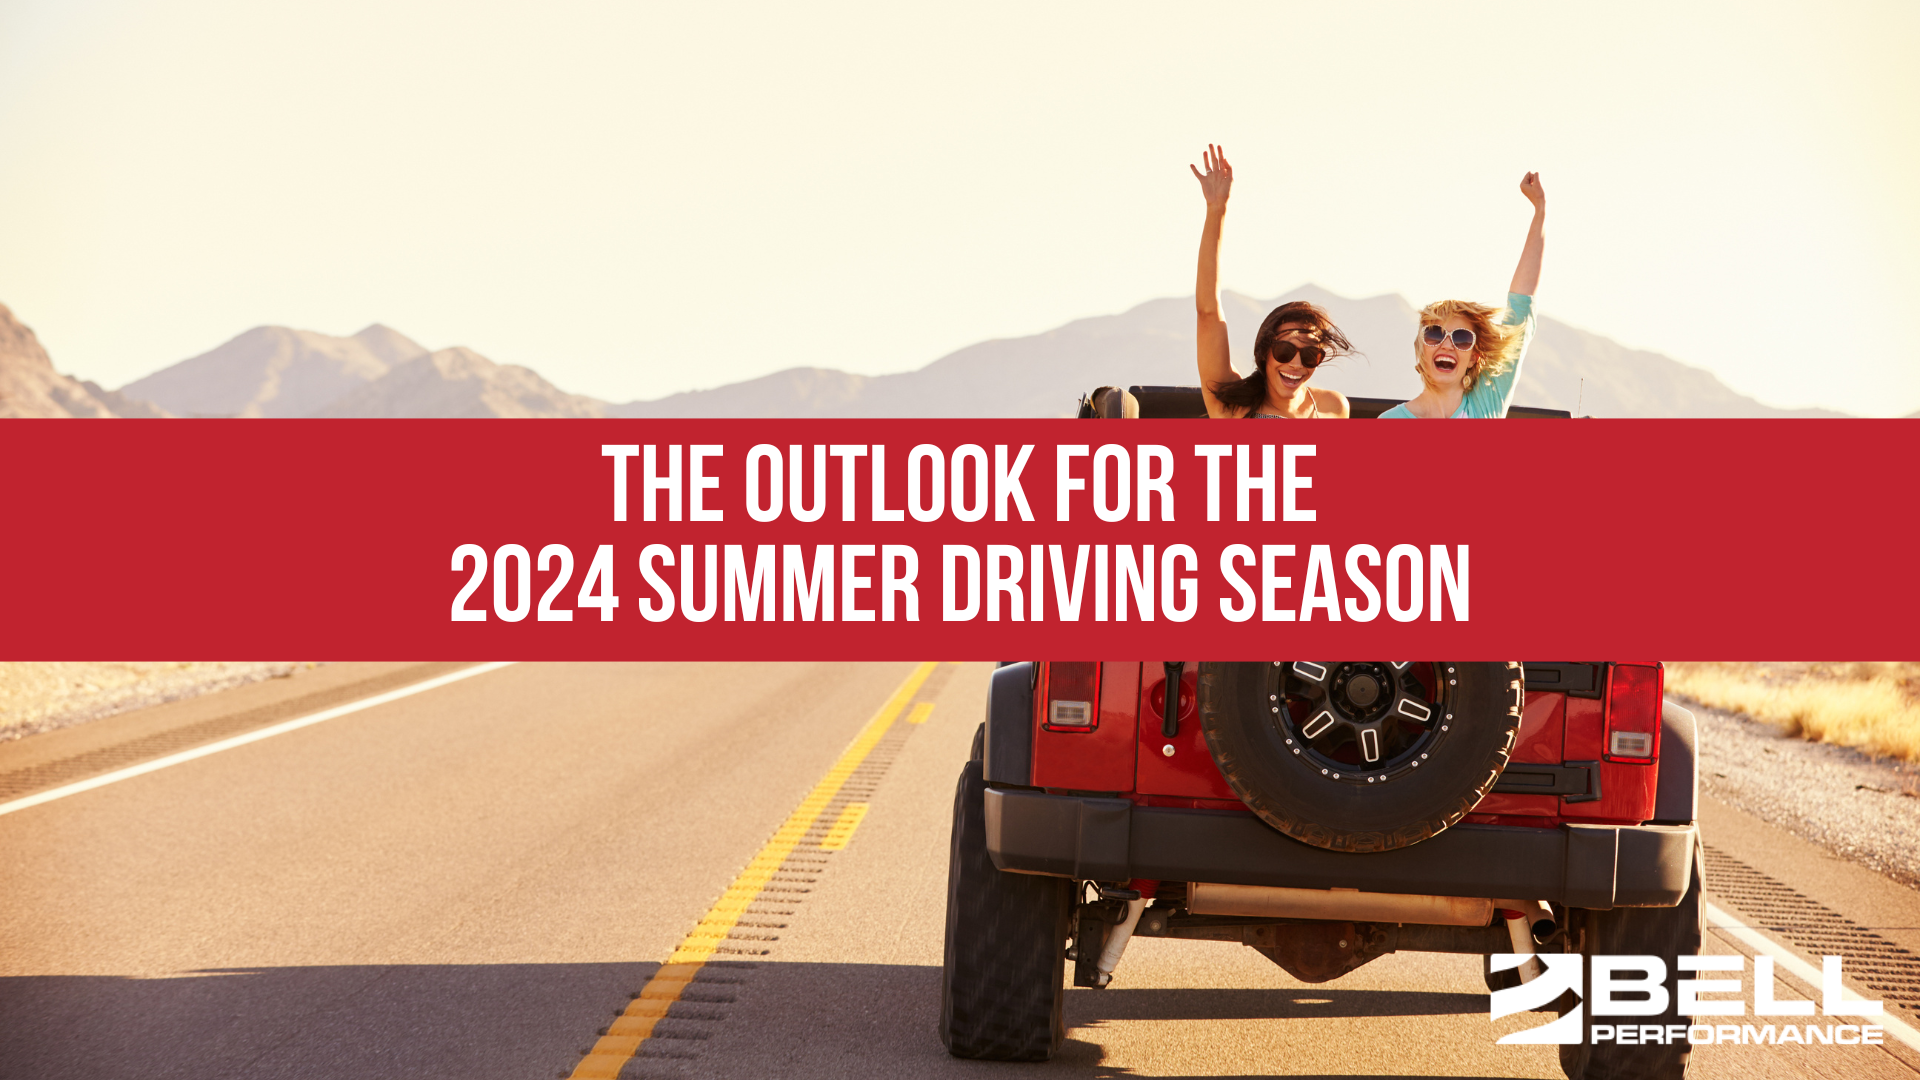 The Outlook for the 2024 Summer Driving Season